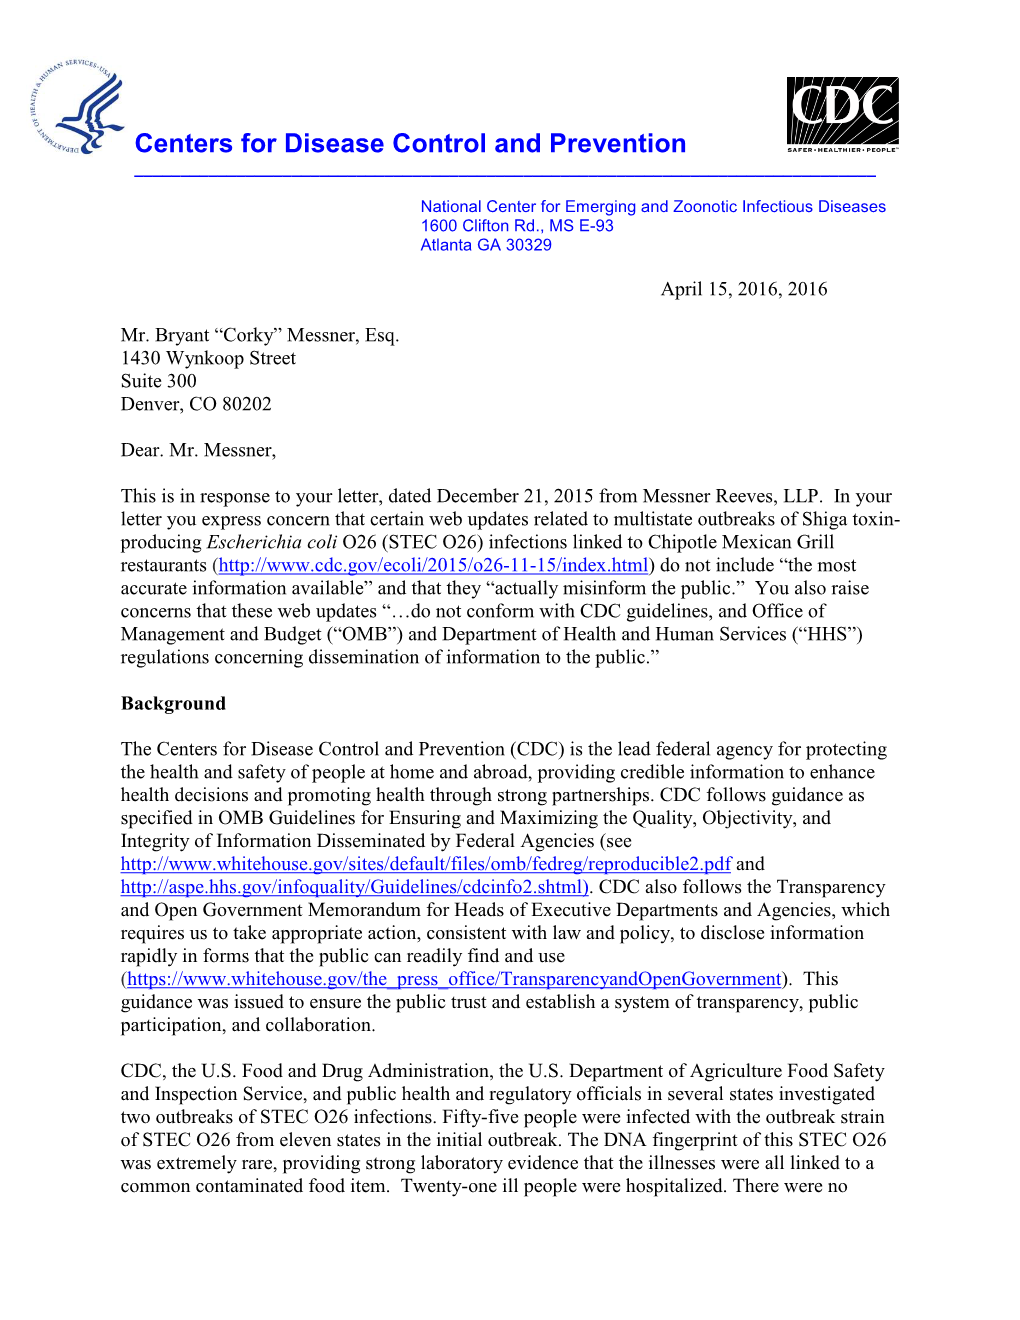 CDC Responsive Letter